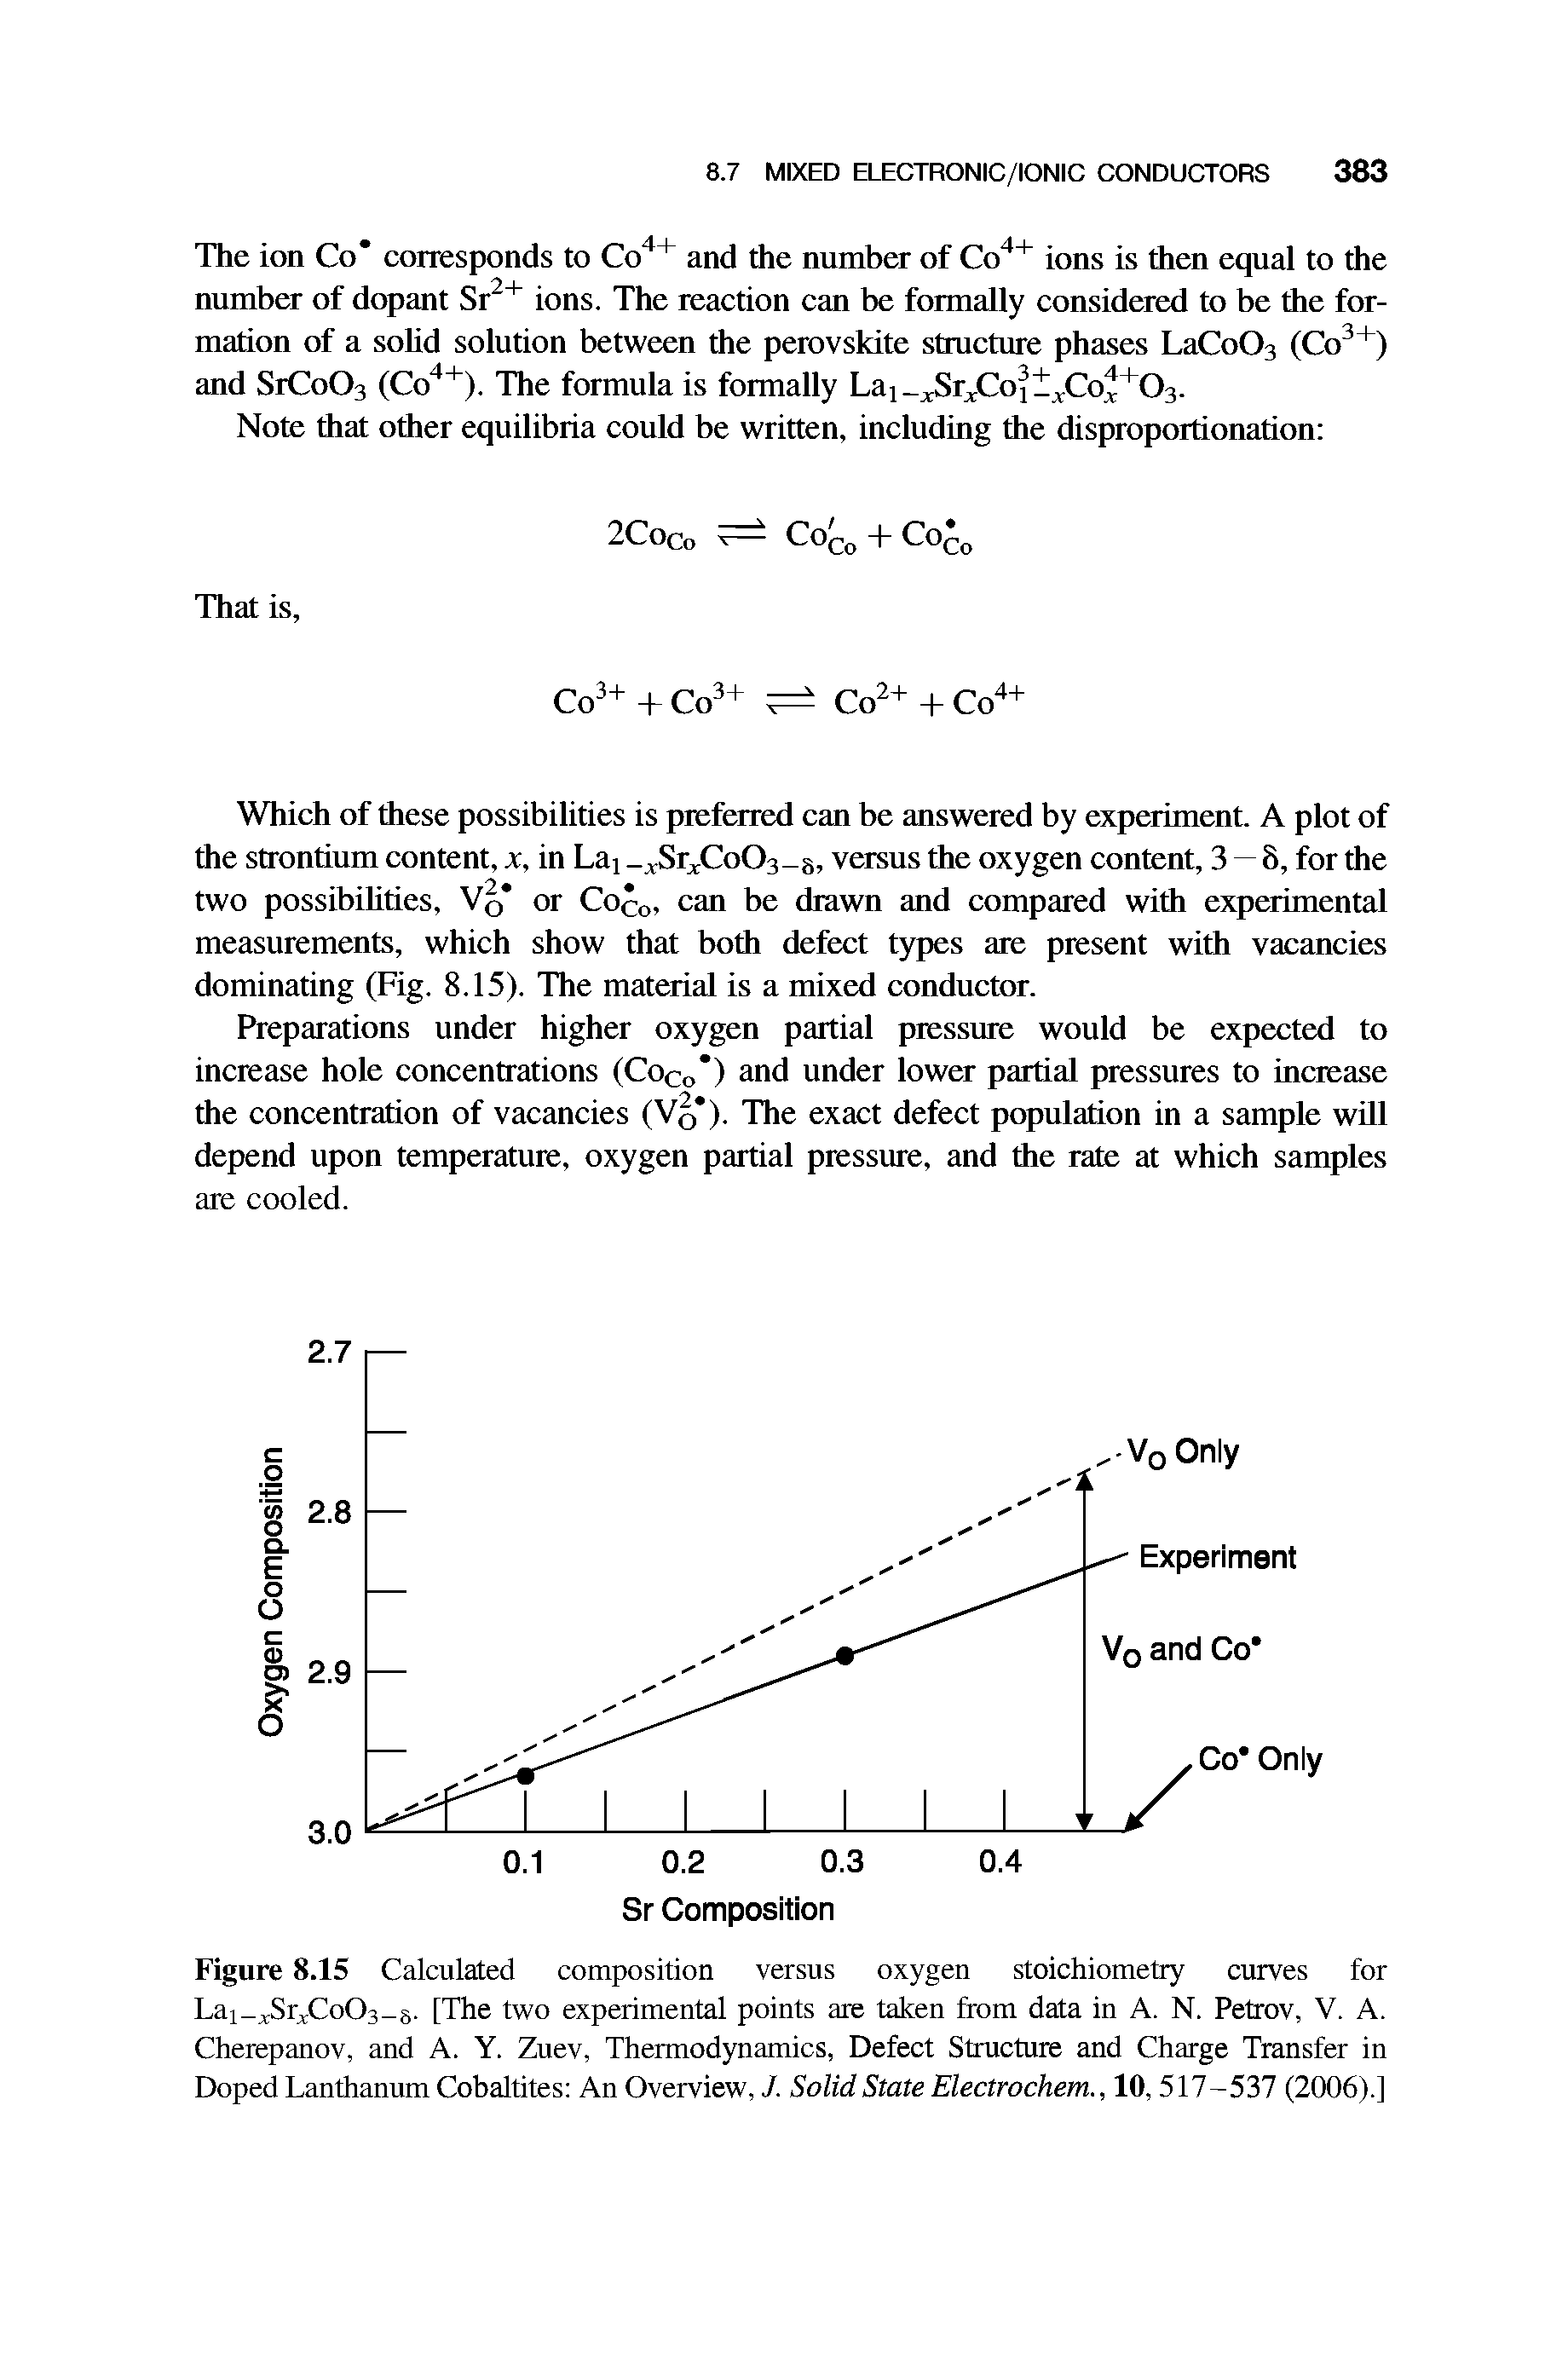 Figure 8.15 Calculated composition versus oxygen stoichiometry curves for Lai- SrjCoCb-s. [The two experimental points are taken from data in A. N. Petrov, V. A. Cherepanov, and A. Y. Zuev, Thermodynamics, Defect Structure and Charge Transfer in Doped Lanthanum Cobaltites An Overview, J. Solid State Electrochem., 10, 517-537 (2006).]...